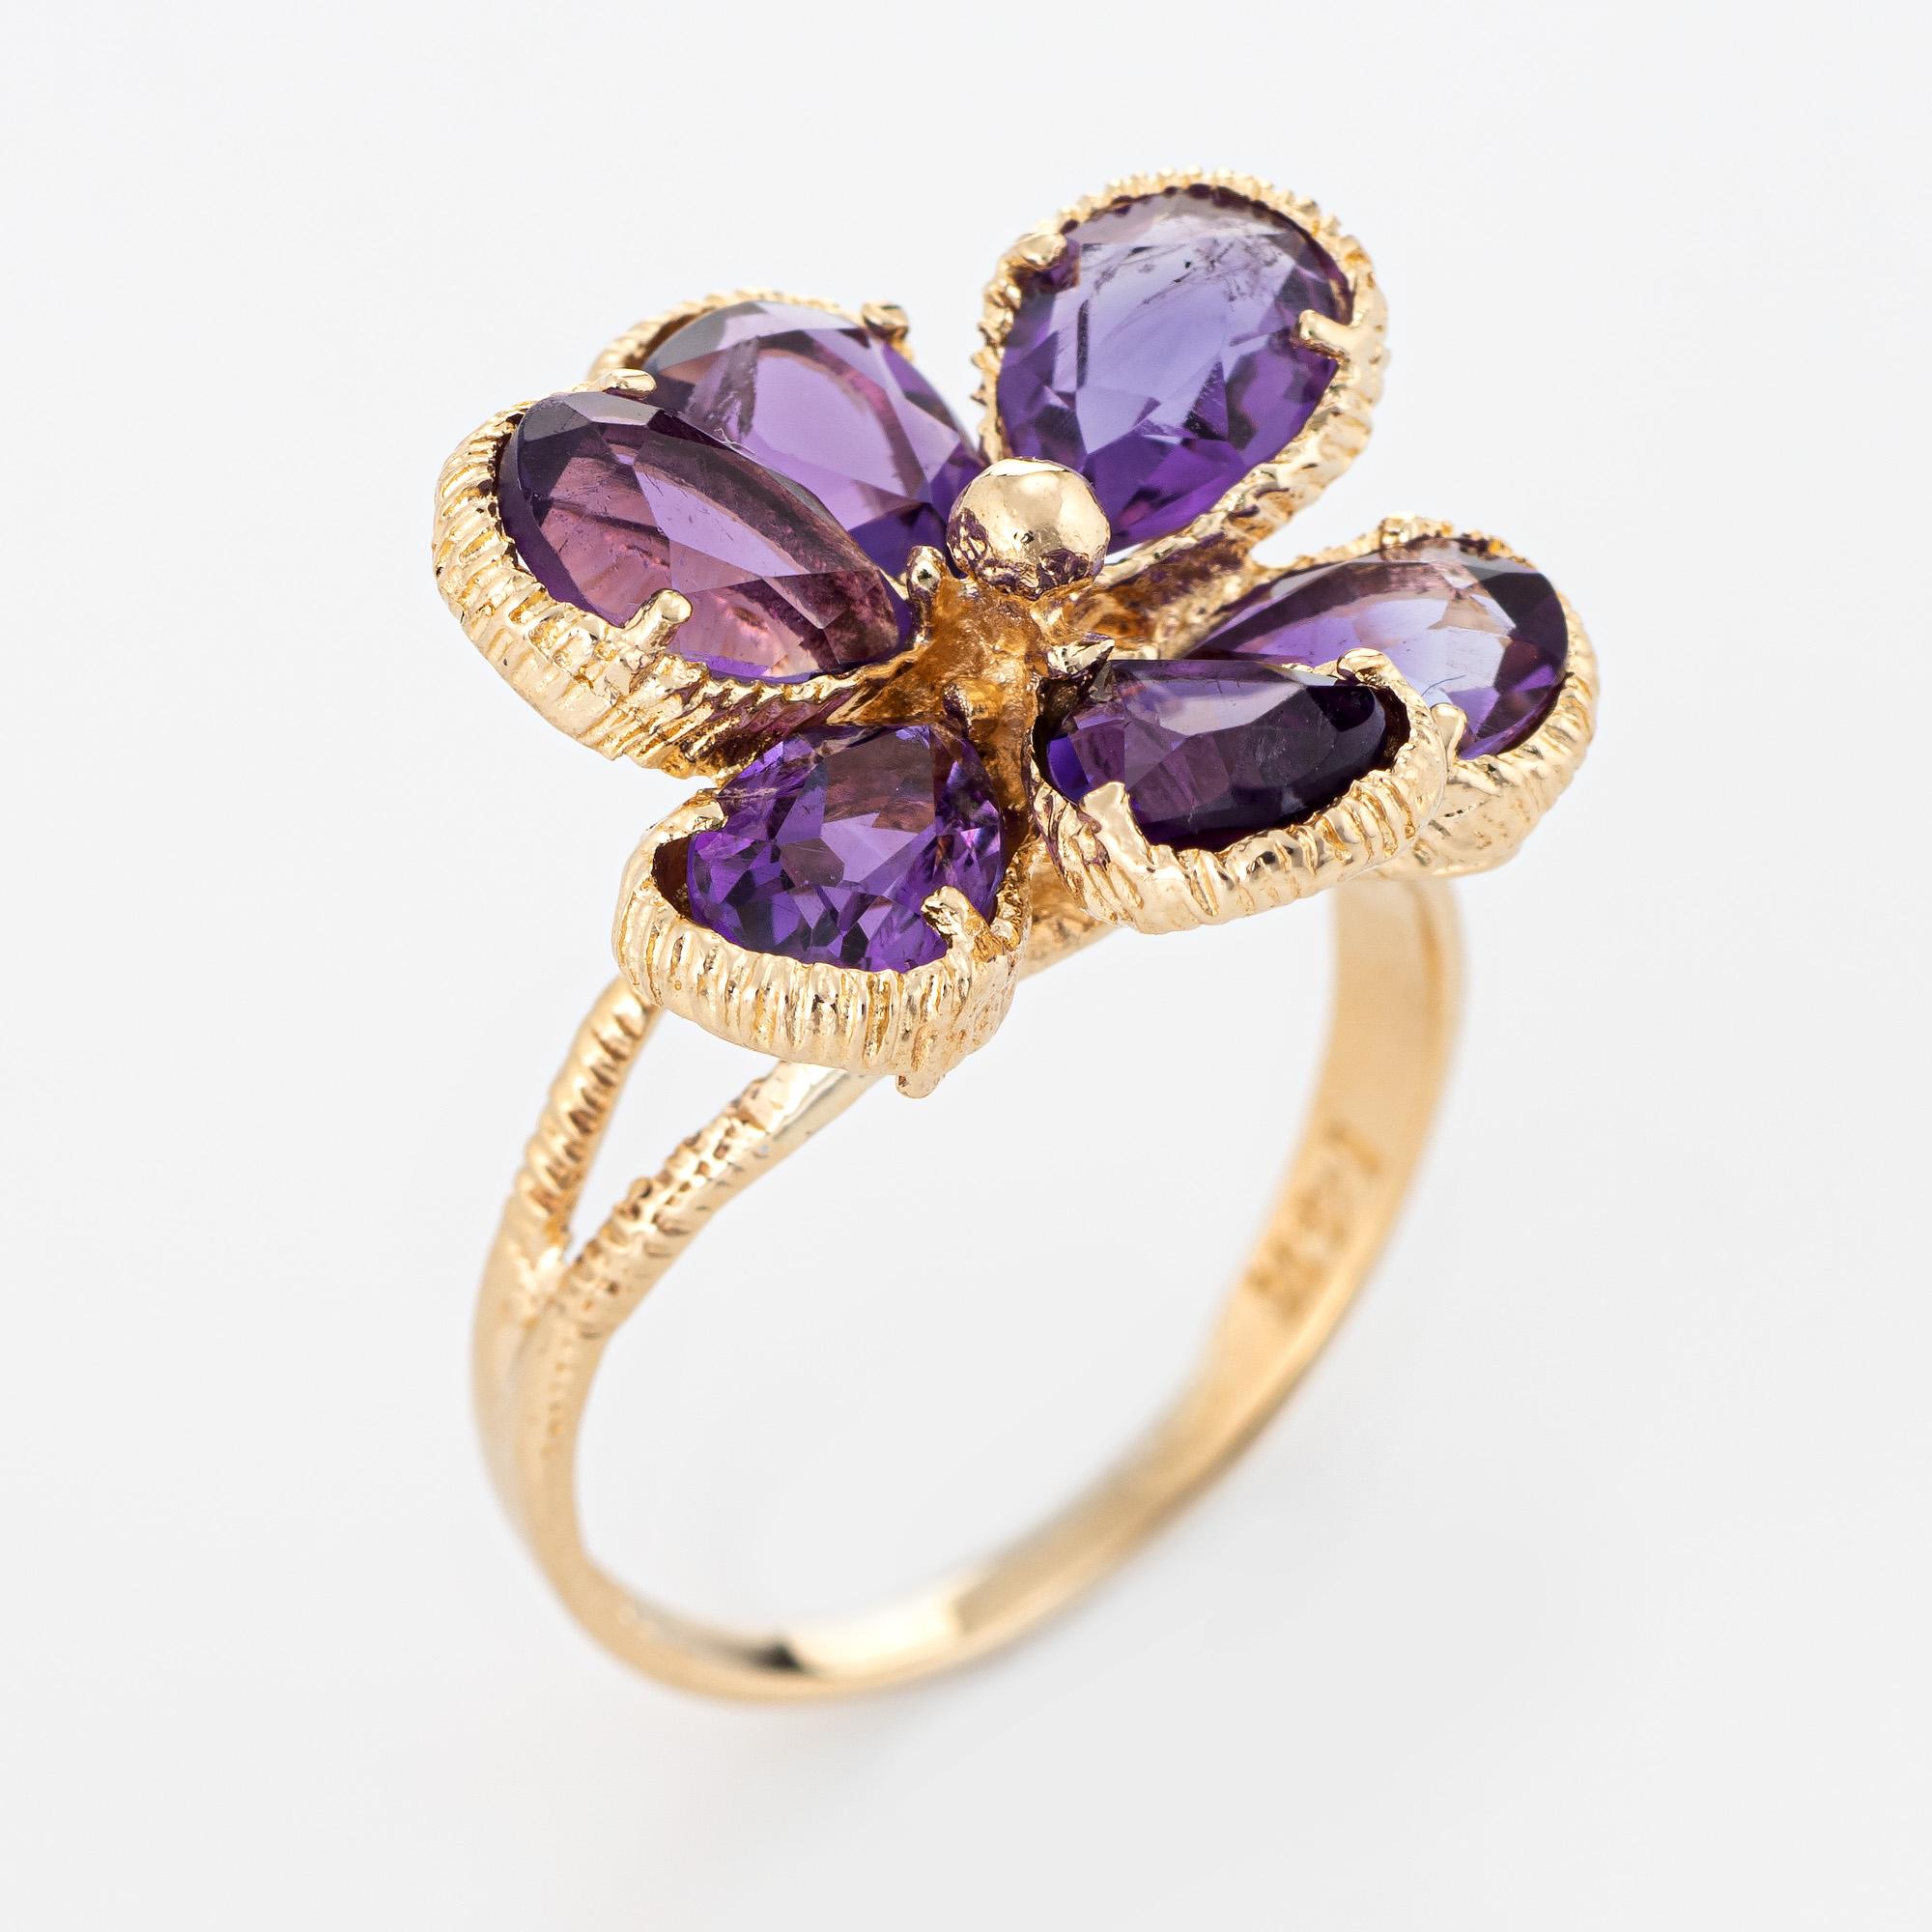 Stylish amethyst cocktail ring crafted in 14 karat yellow gold. 

Faceted pear cut amethyst measures 6mm x 4mm (estimated at 0.50 carats each) and total an estimated 2.50 carats. The amethysts are in excellent condition and free of cracks or chips.